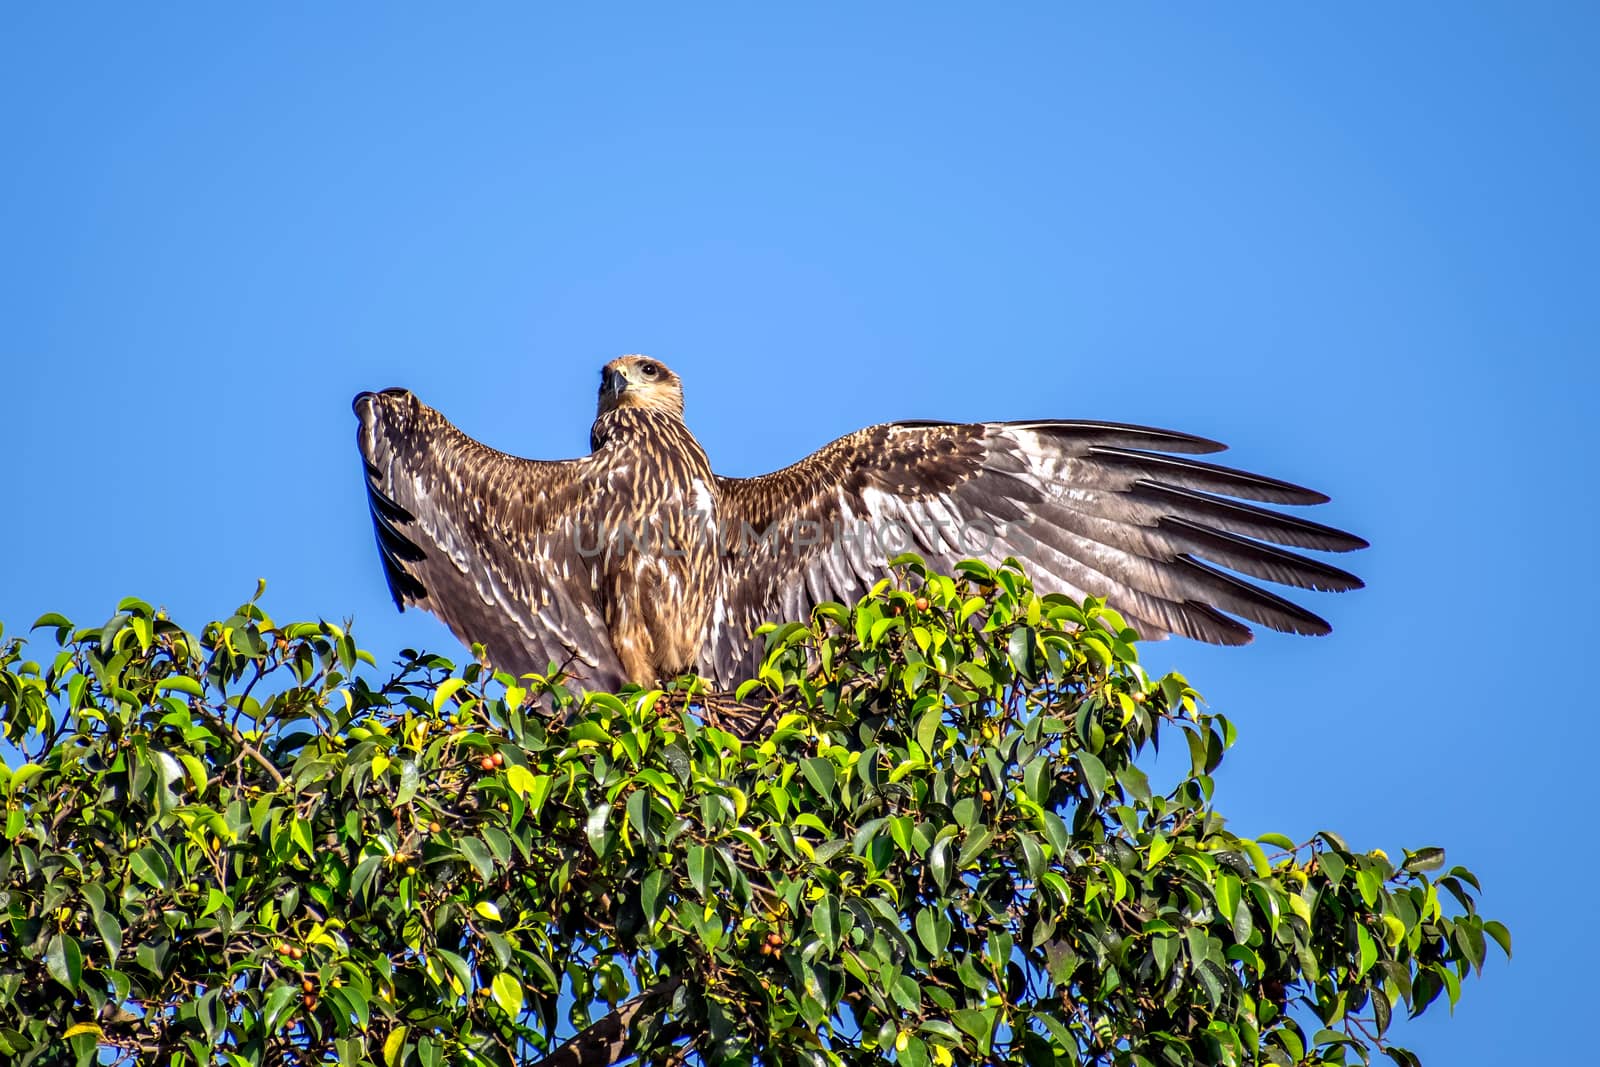 Black kite bird spreading large wings & sitting on top of tree. by lalam